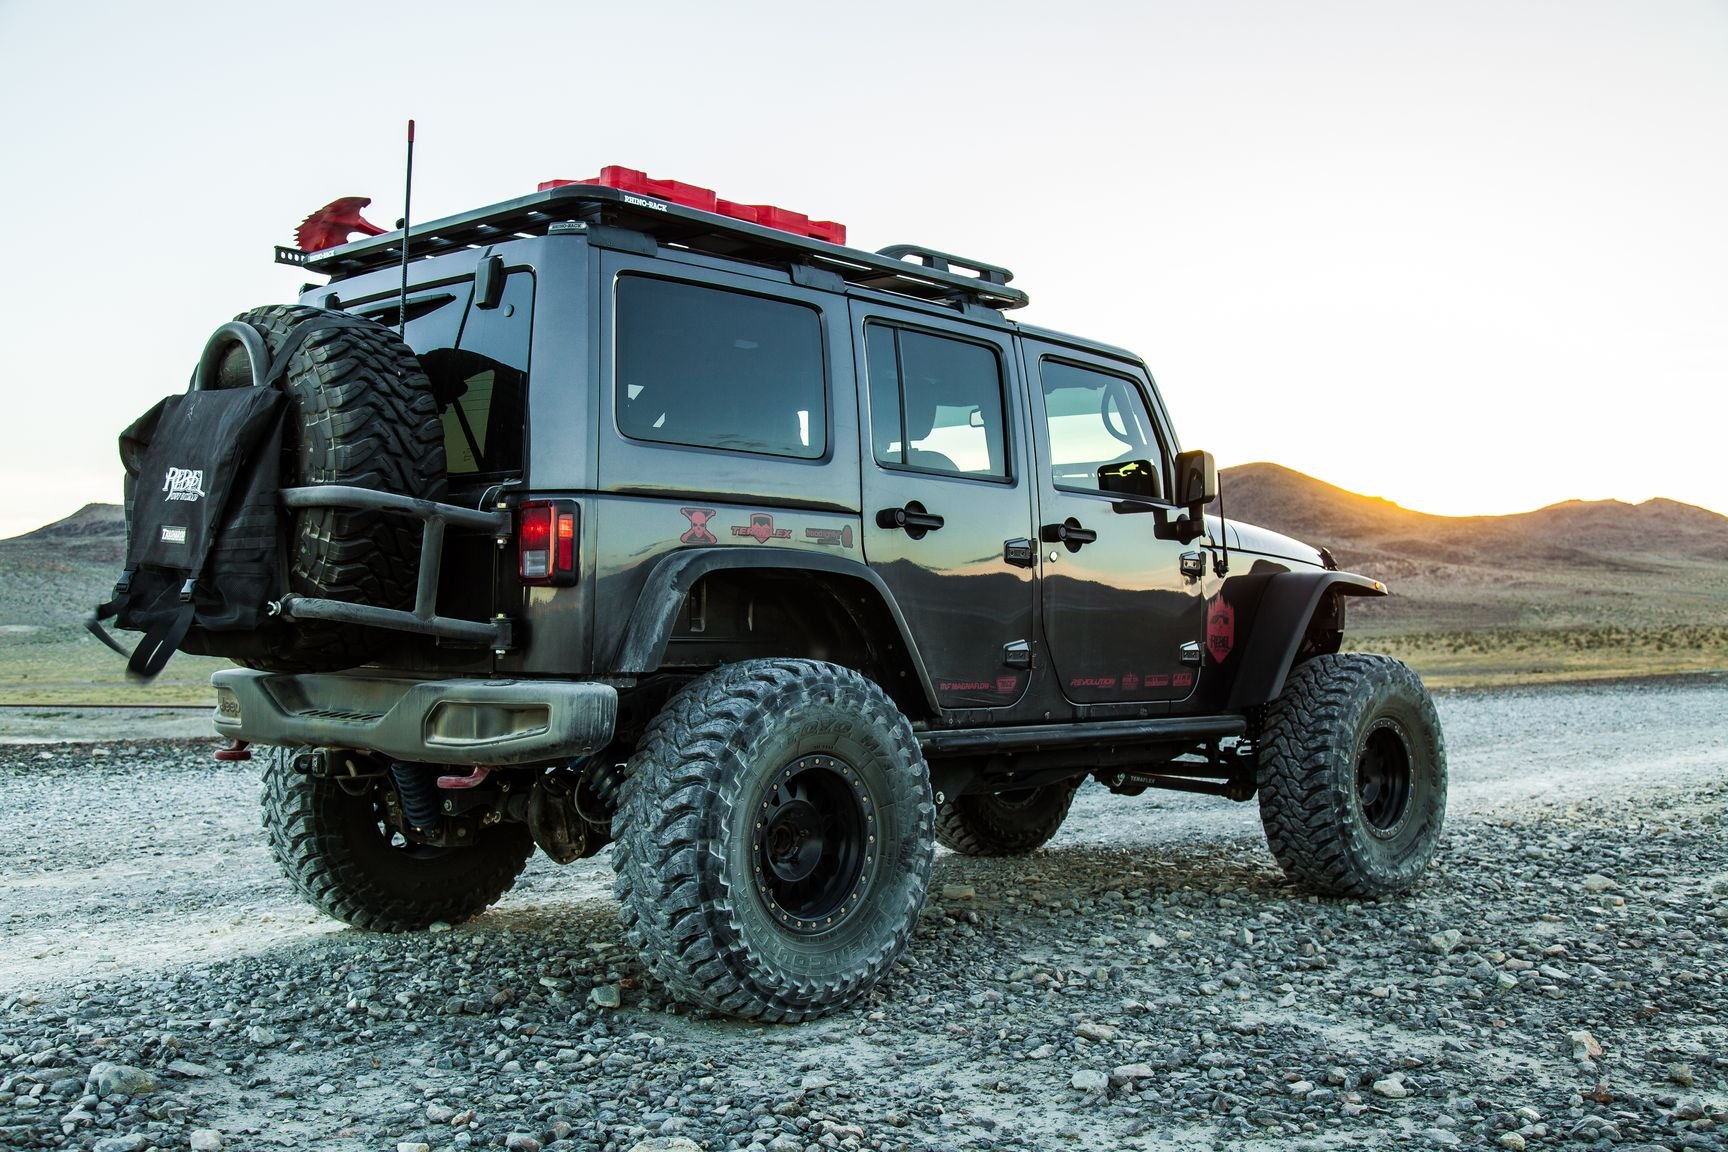 Black Lifted Jeep Wrangler Customized for Active Lifestyle Carrying Rhino  Rack Bike Rack —  Gallery